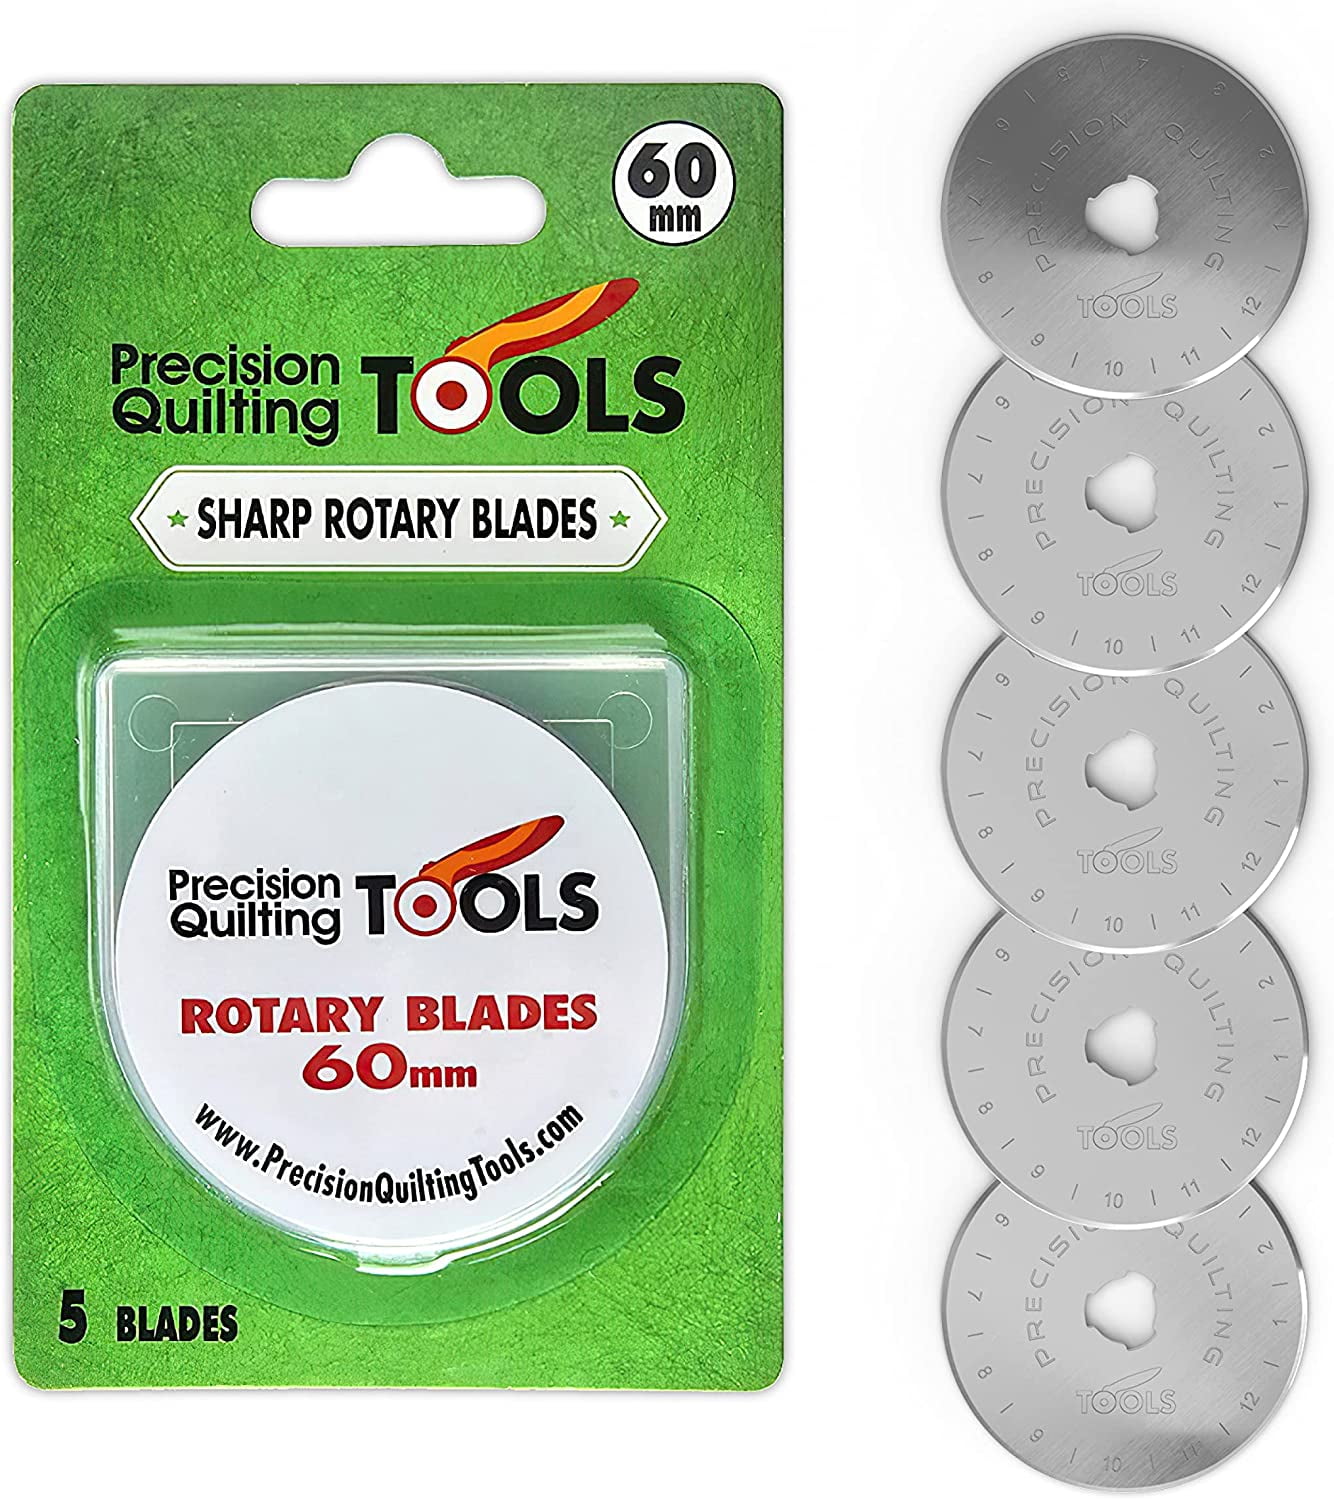 Precision Quilting Tools, 60Mm Rotary Cutter Blades Pack Of 5 Sks-7  Carbide